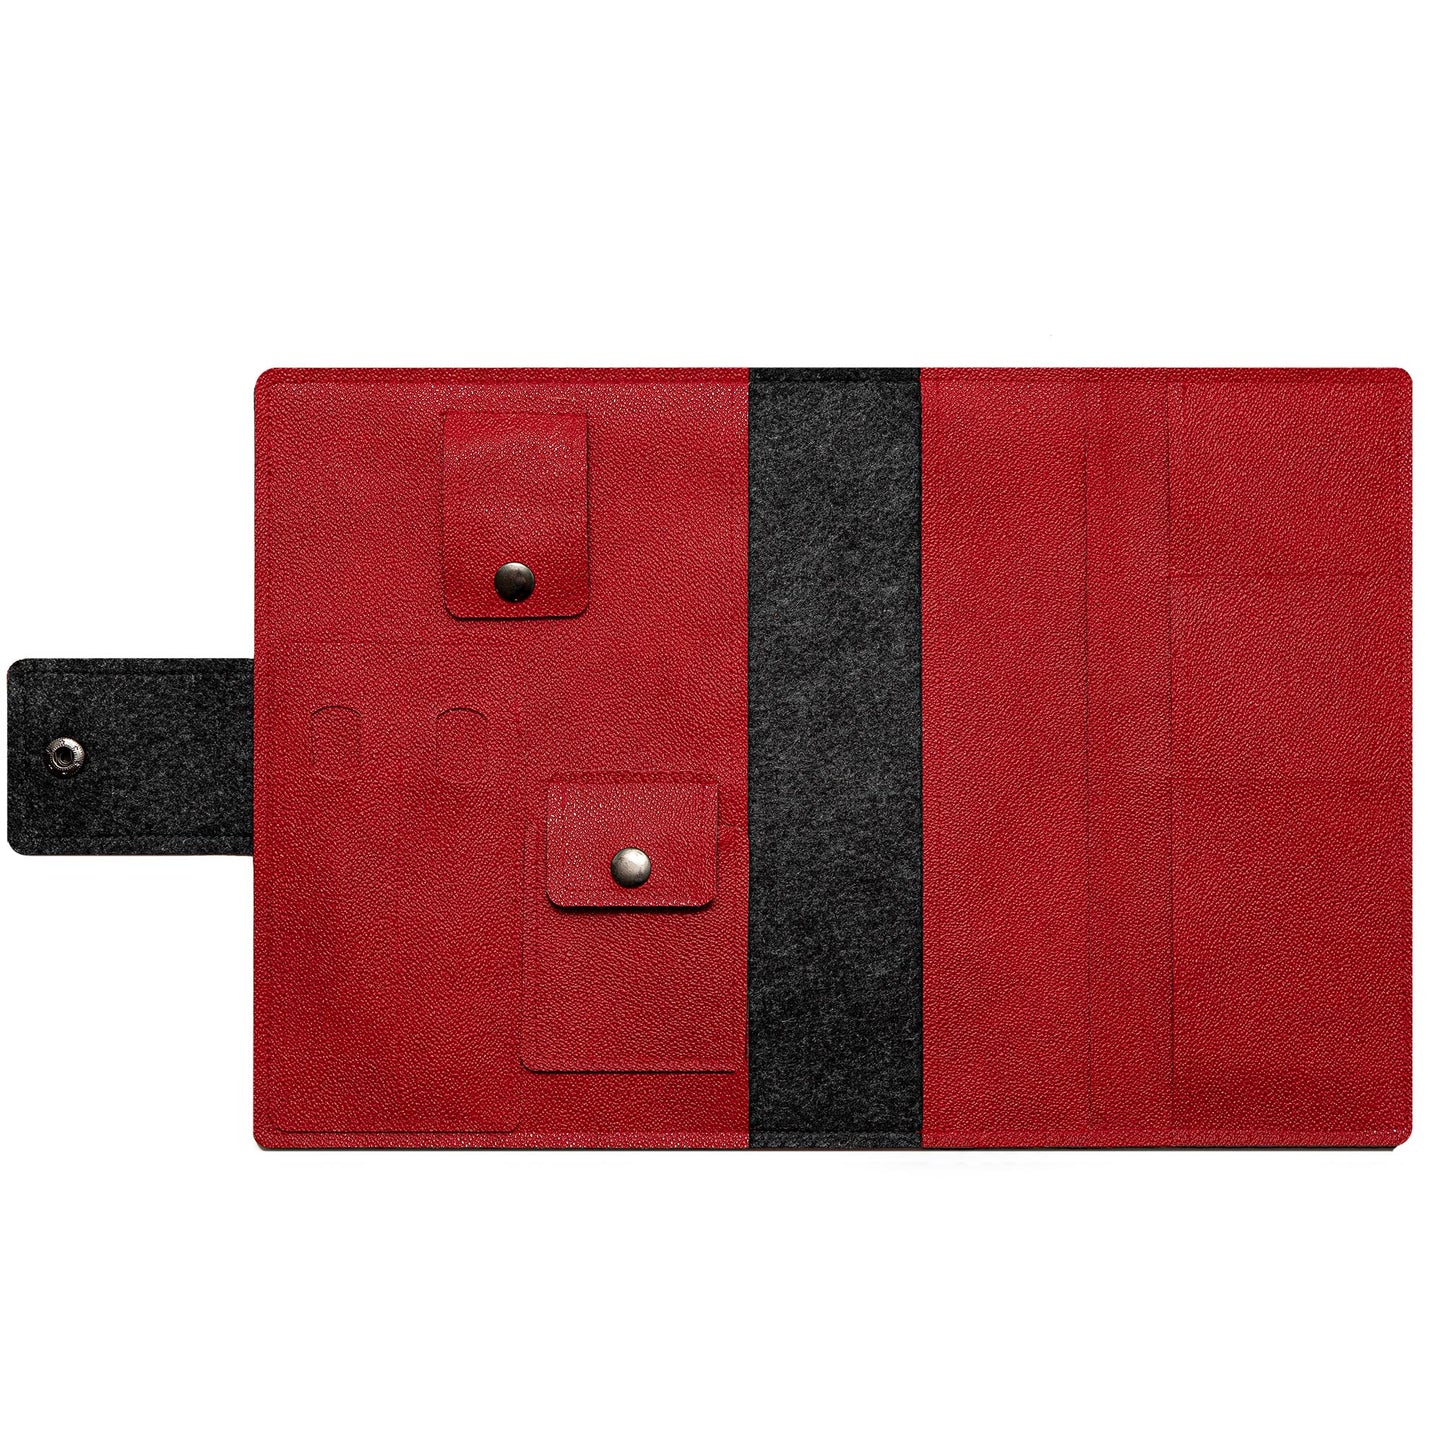 Handmade Folio Cover for iPad/Pro/Air - Red Faux Leather